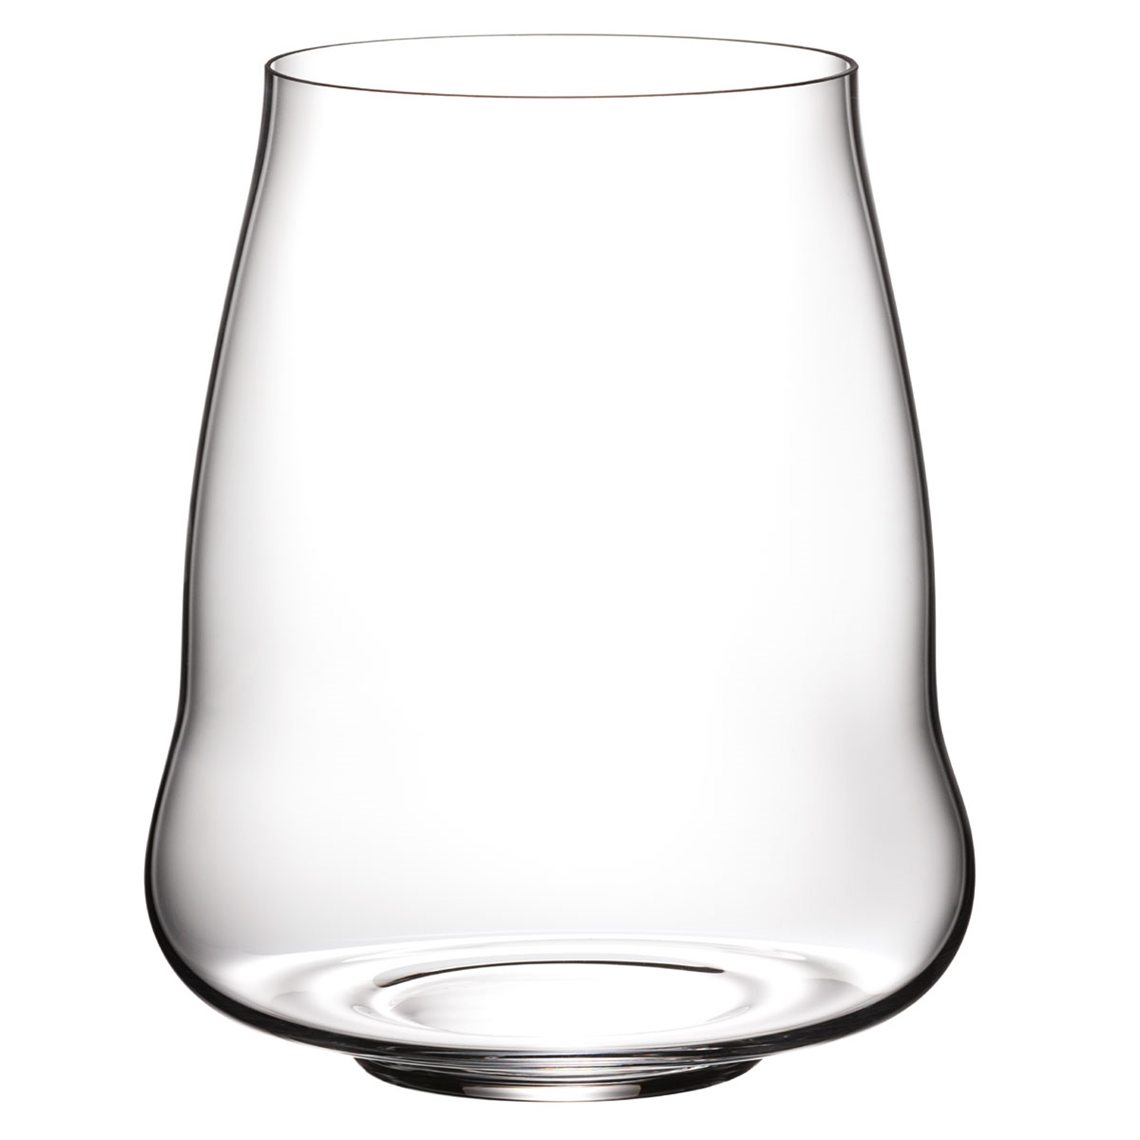 Riedel Stemless Wings Pinot Noir/Nebbiolo Glass - Set of 2 - 6789/07